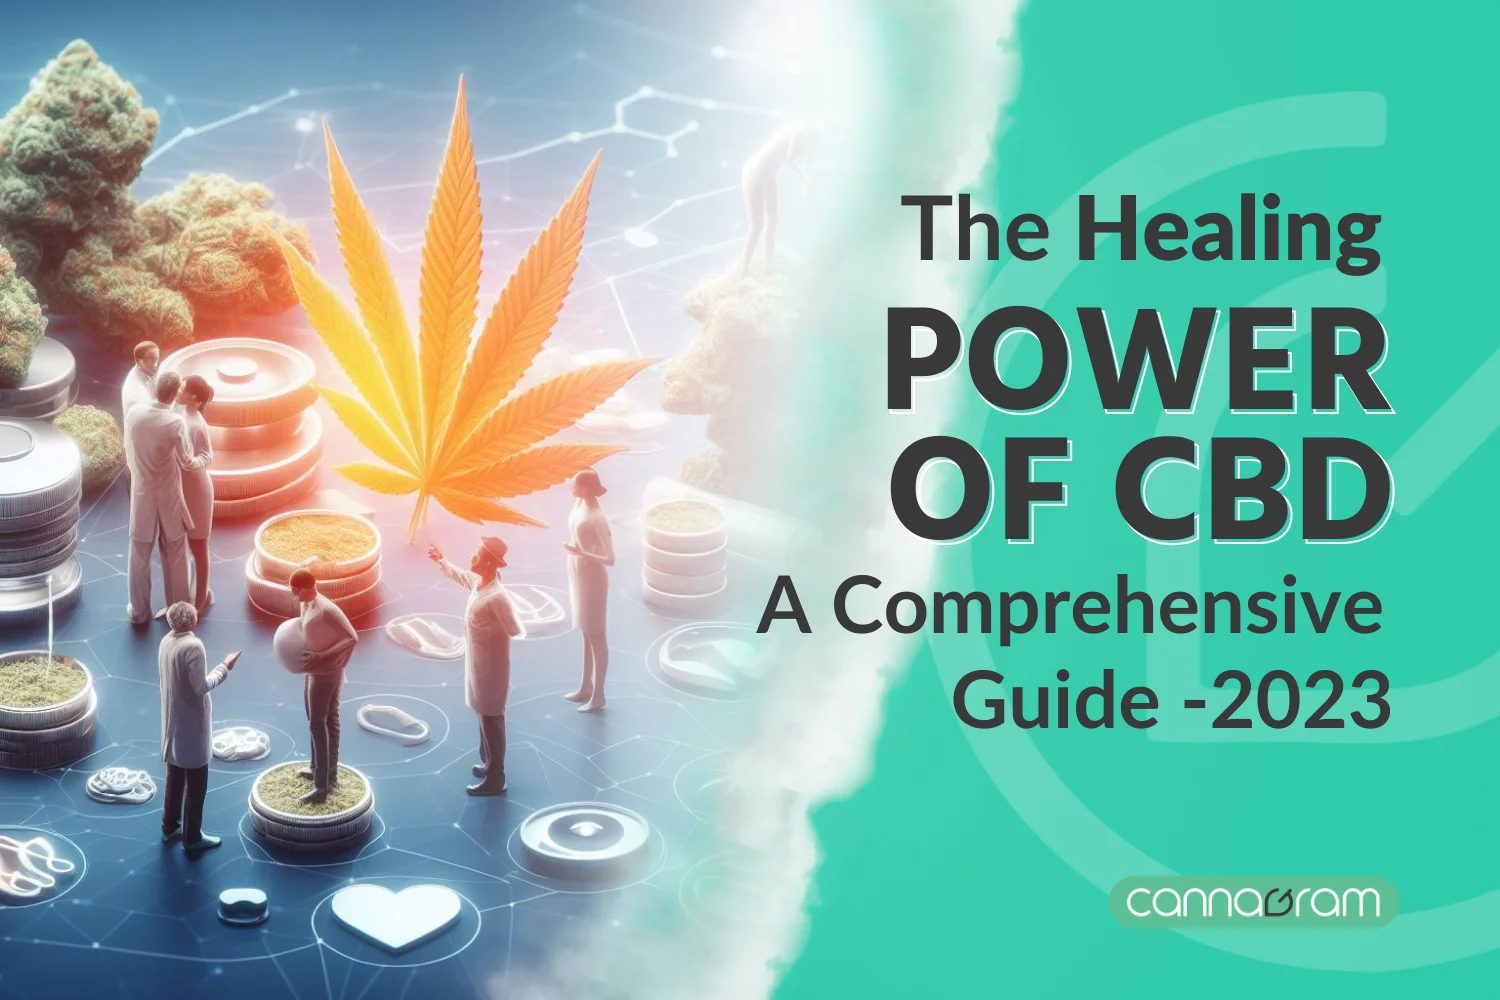 Group-of-Doctors-Studying-Medicinal-and-healing-Effects-of-CBD-CBD-Oil-CBD gummies-with-Patients-Getting-Treatment, and-shop-in-Best-Cannabis-delivery-in-Sacramento